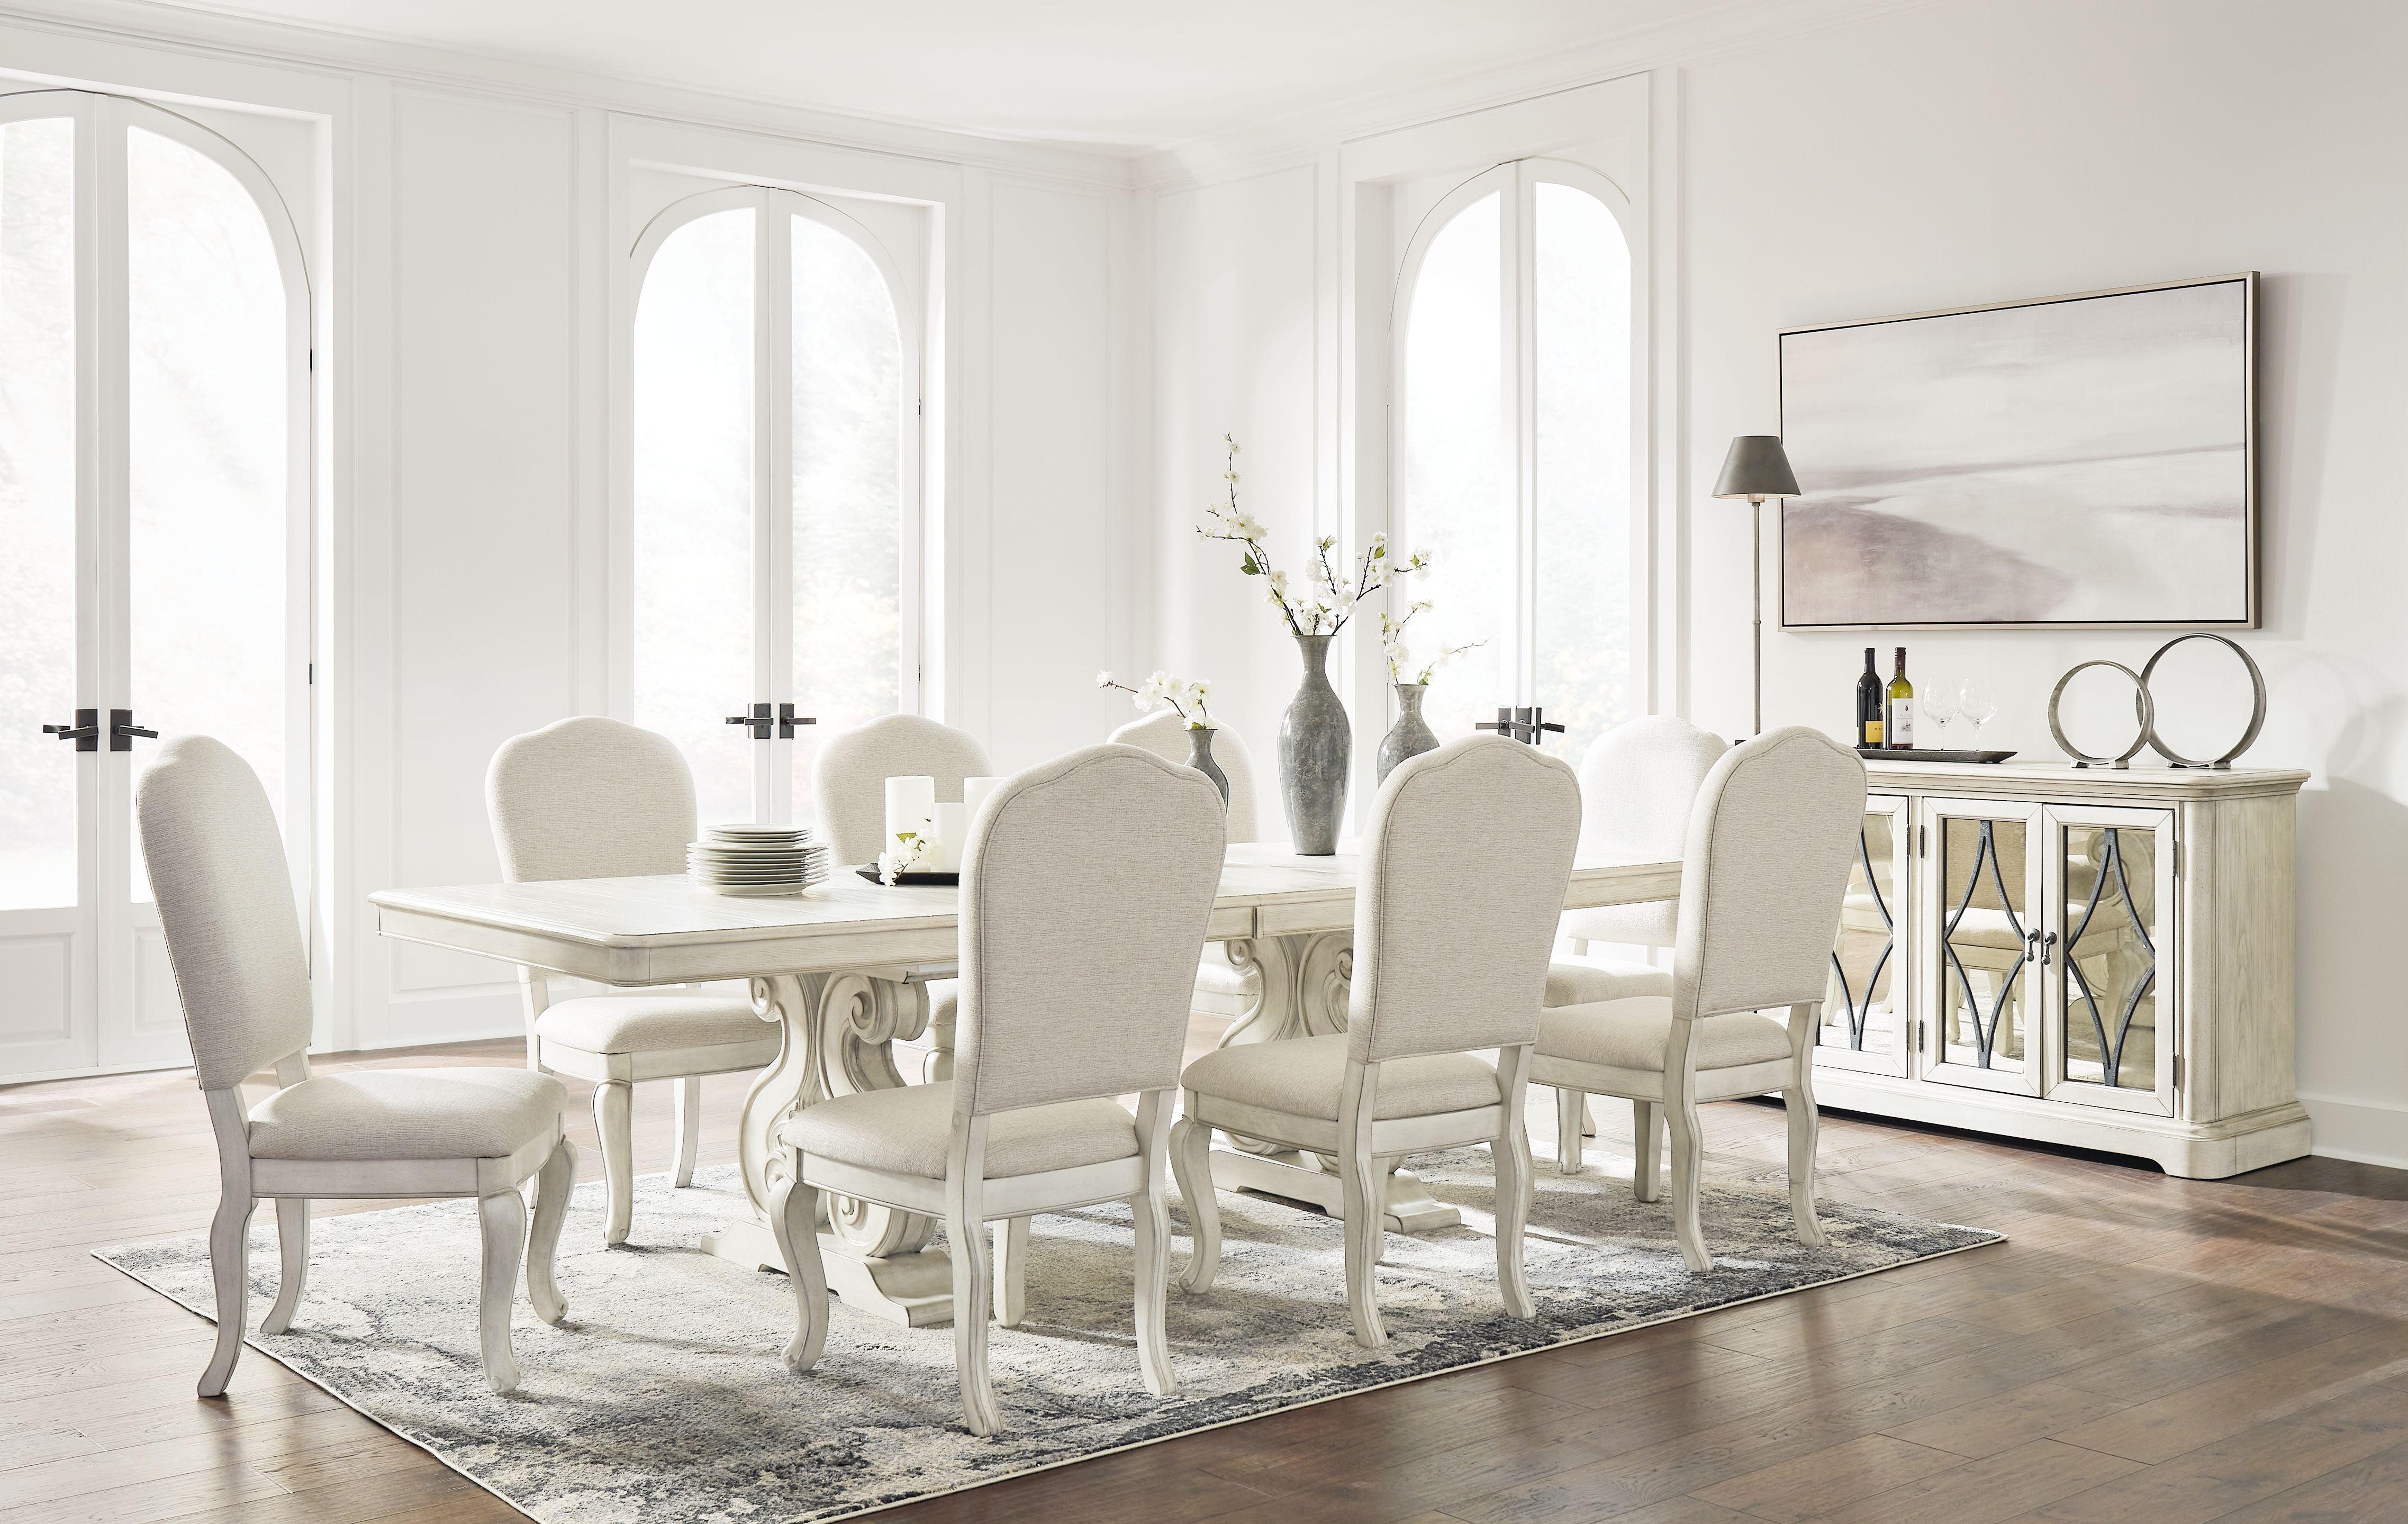 Signature Design by Ashley® - Arlendyne - Antique White - 11 Pc. - Dining Table, 8 Side Chairs, Server - 5th Avenue Furniture